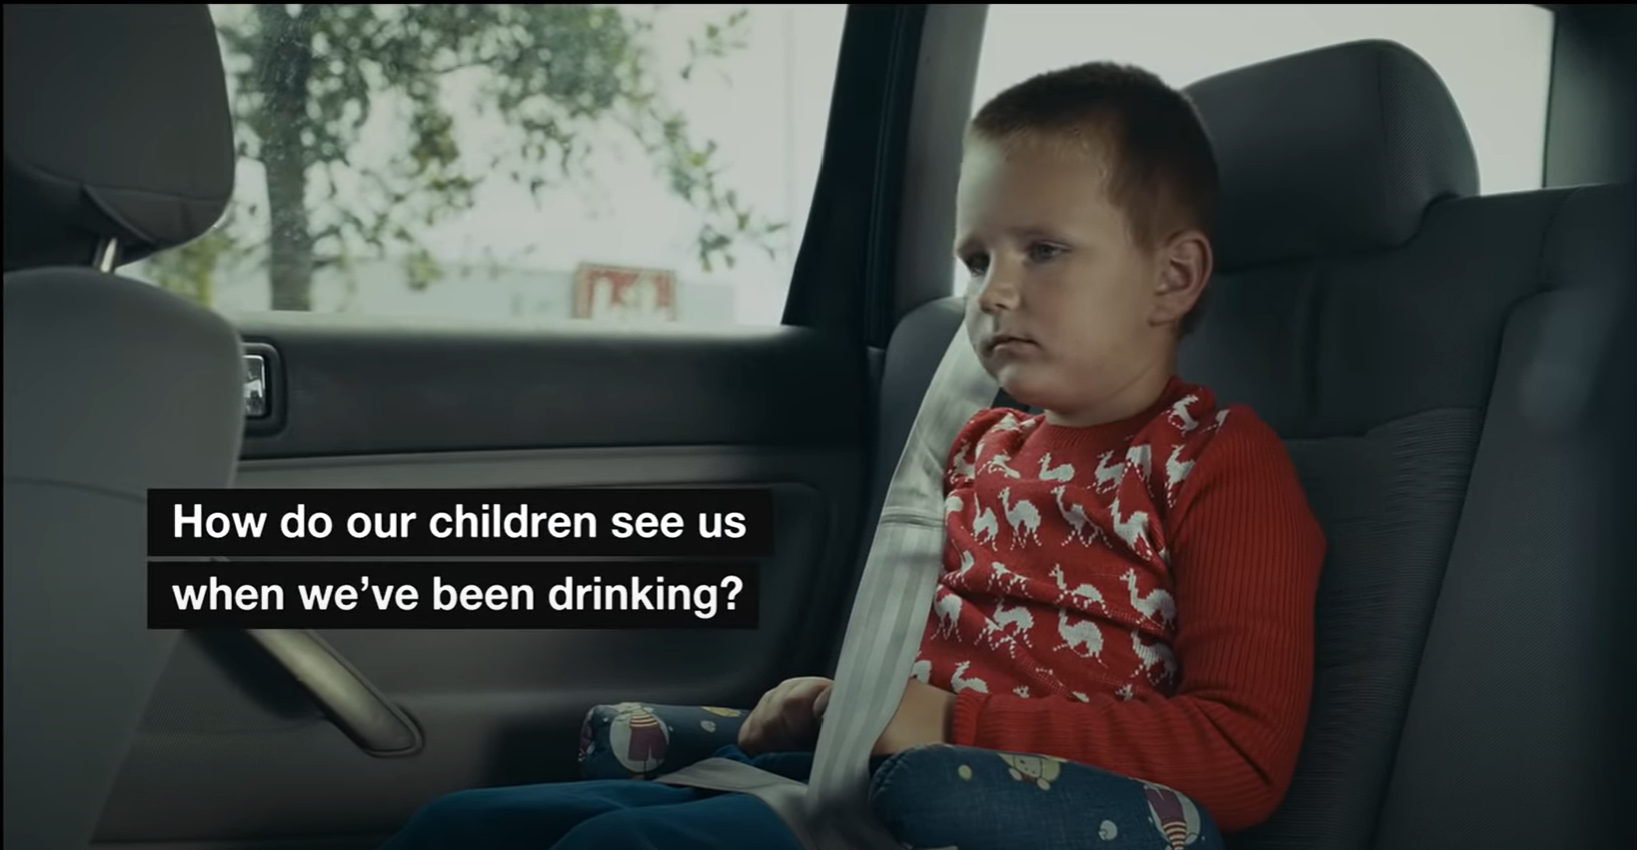 Thông điệp "How children see us when we've been drinking? 